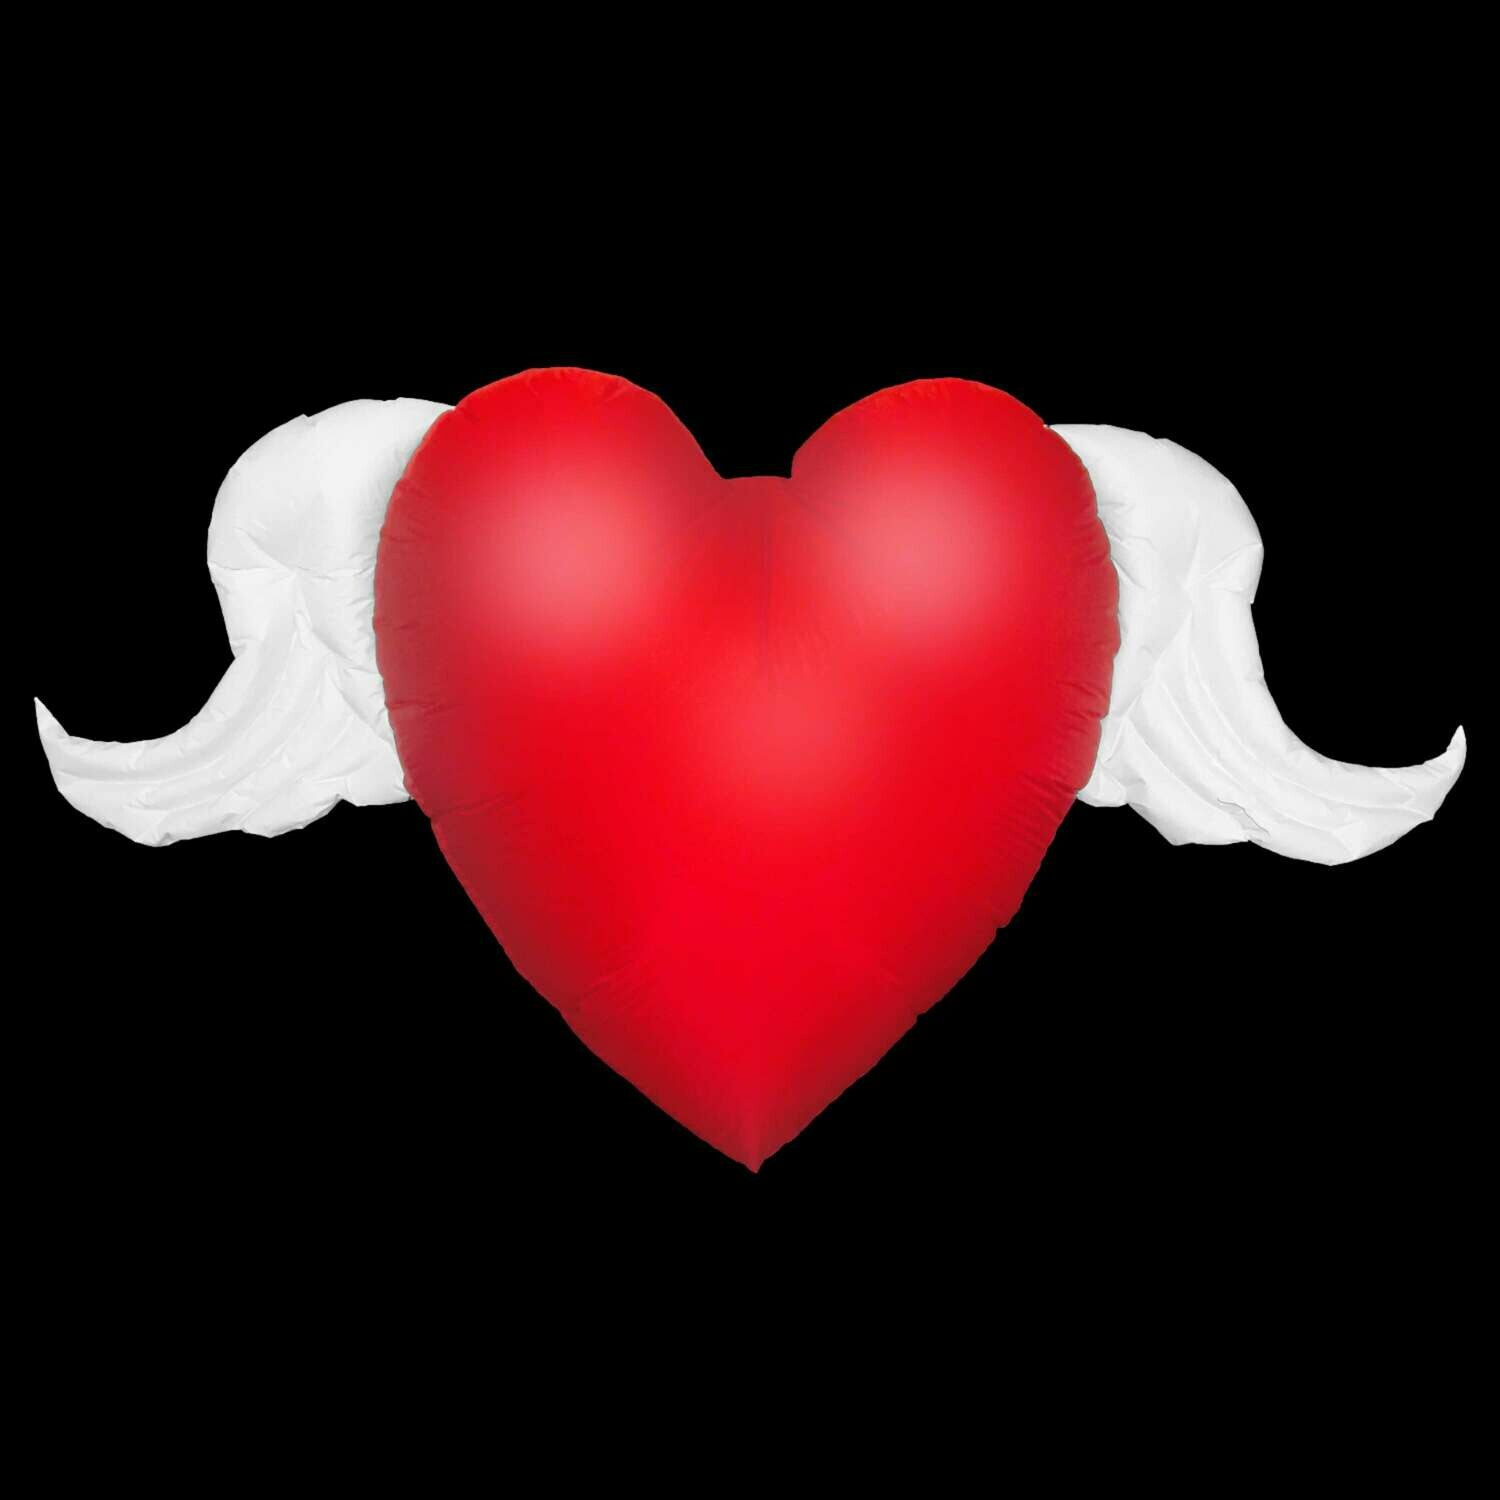 Hanging Inflatable Winged Heart 7.1ft/217cm x 4ft/122cm